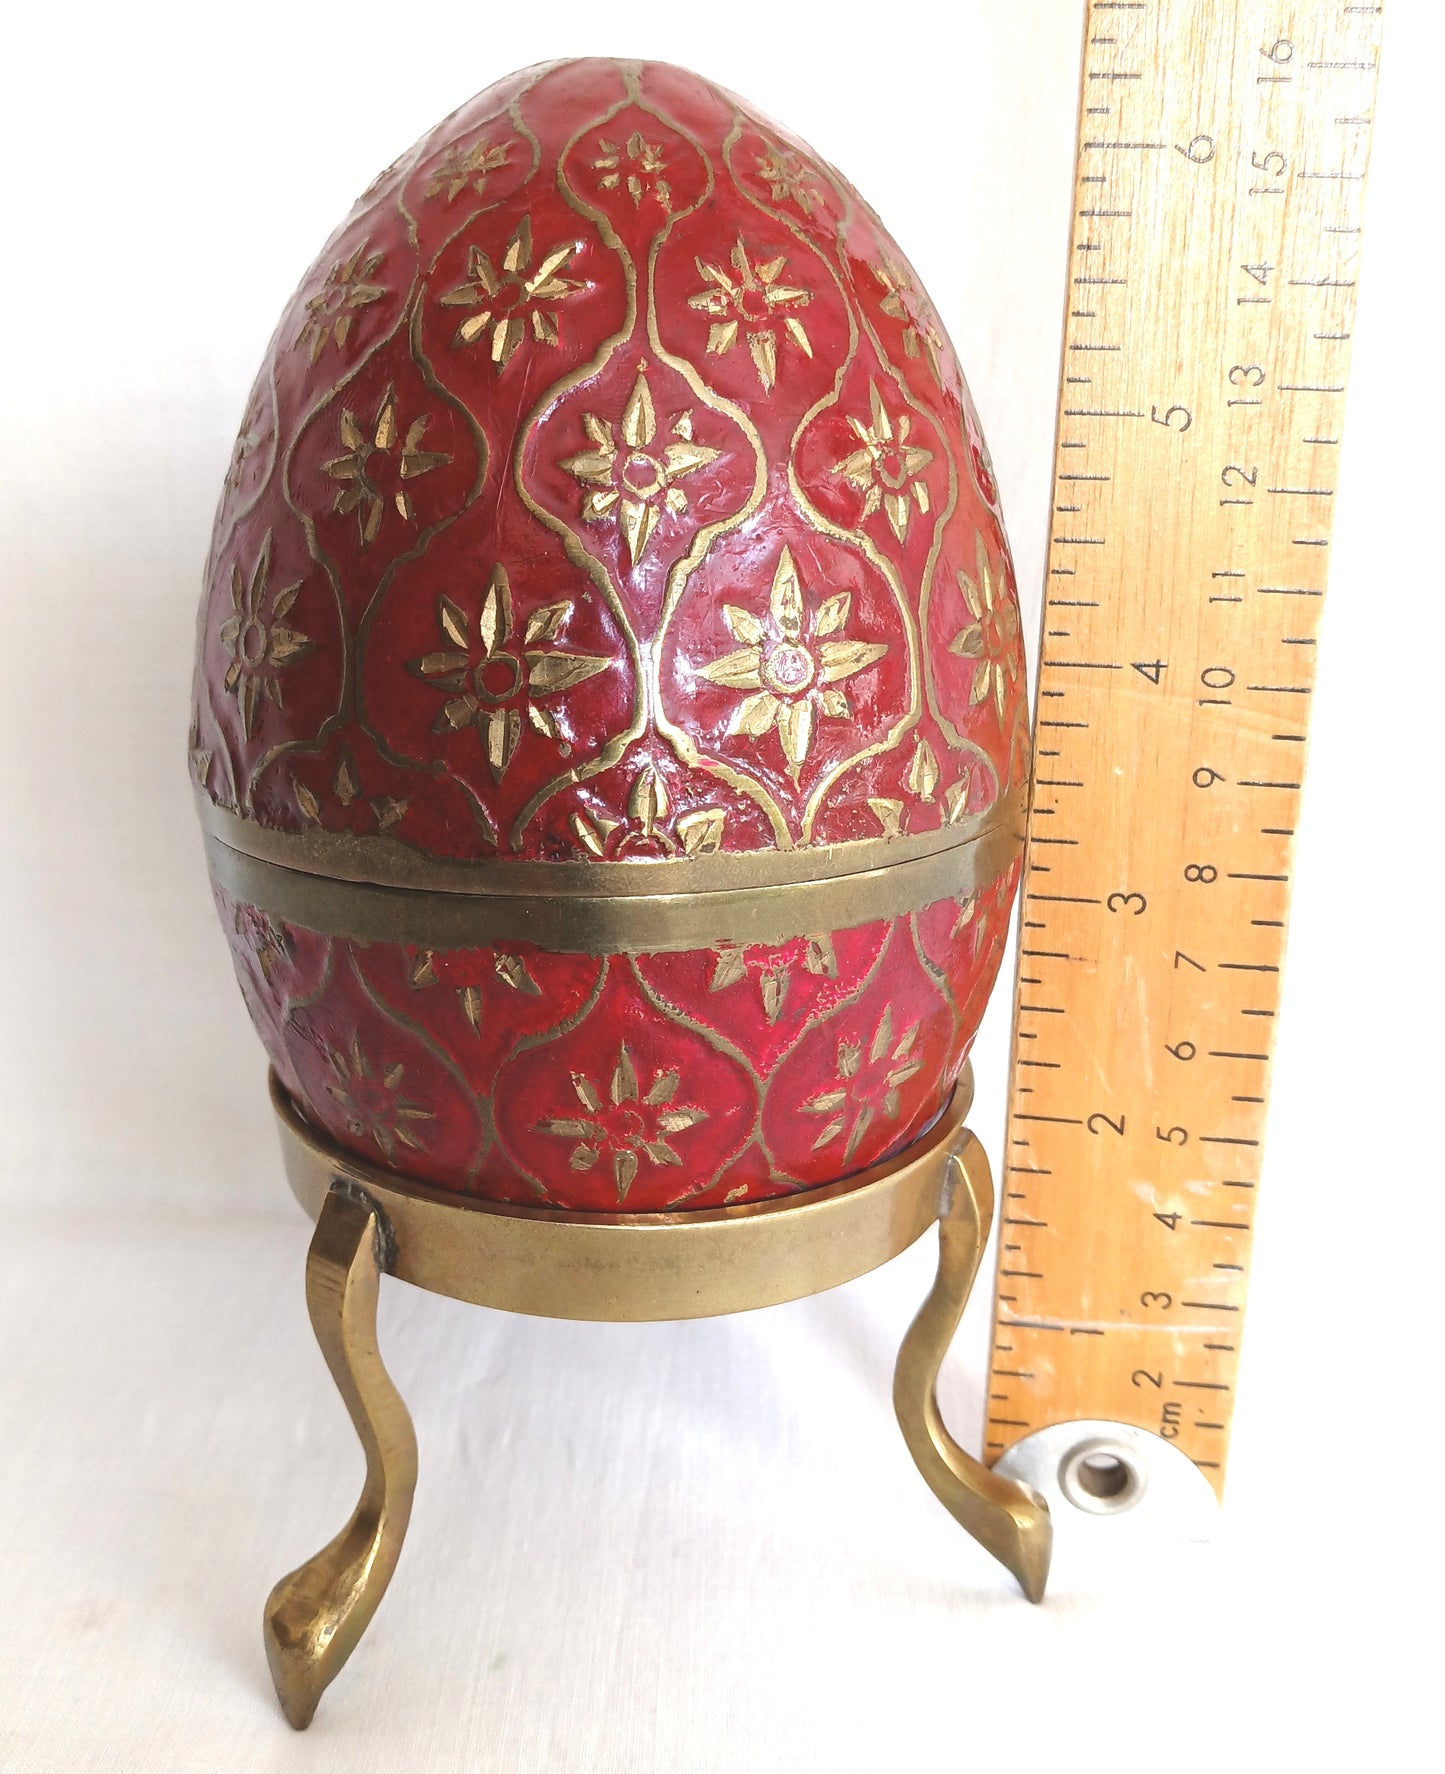 Vintage Cloisonné Large Egg Shaped Red Enamel Brass Floral Design Egg Opens in the Middle Solid Brass Stand Trinket Box-Made in India